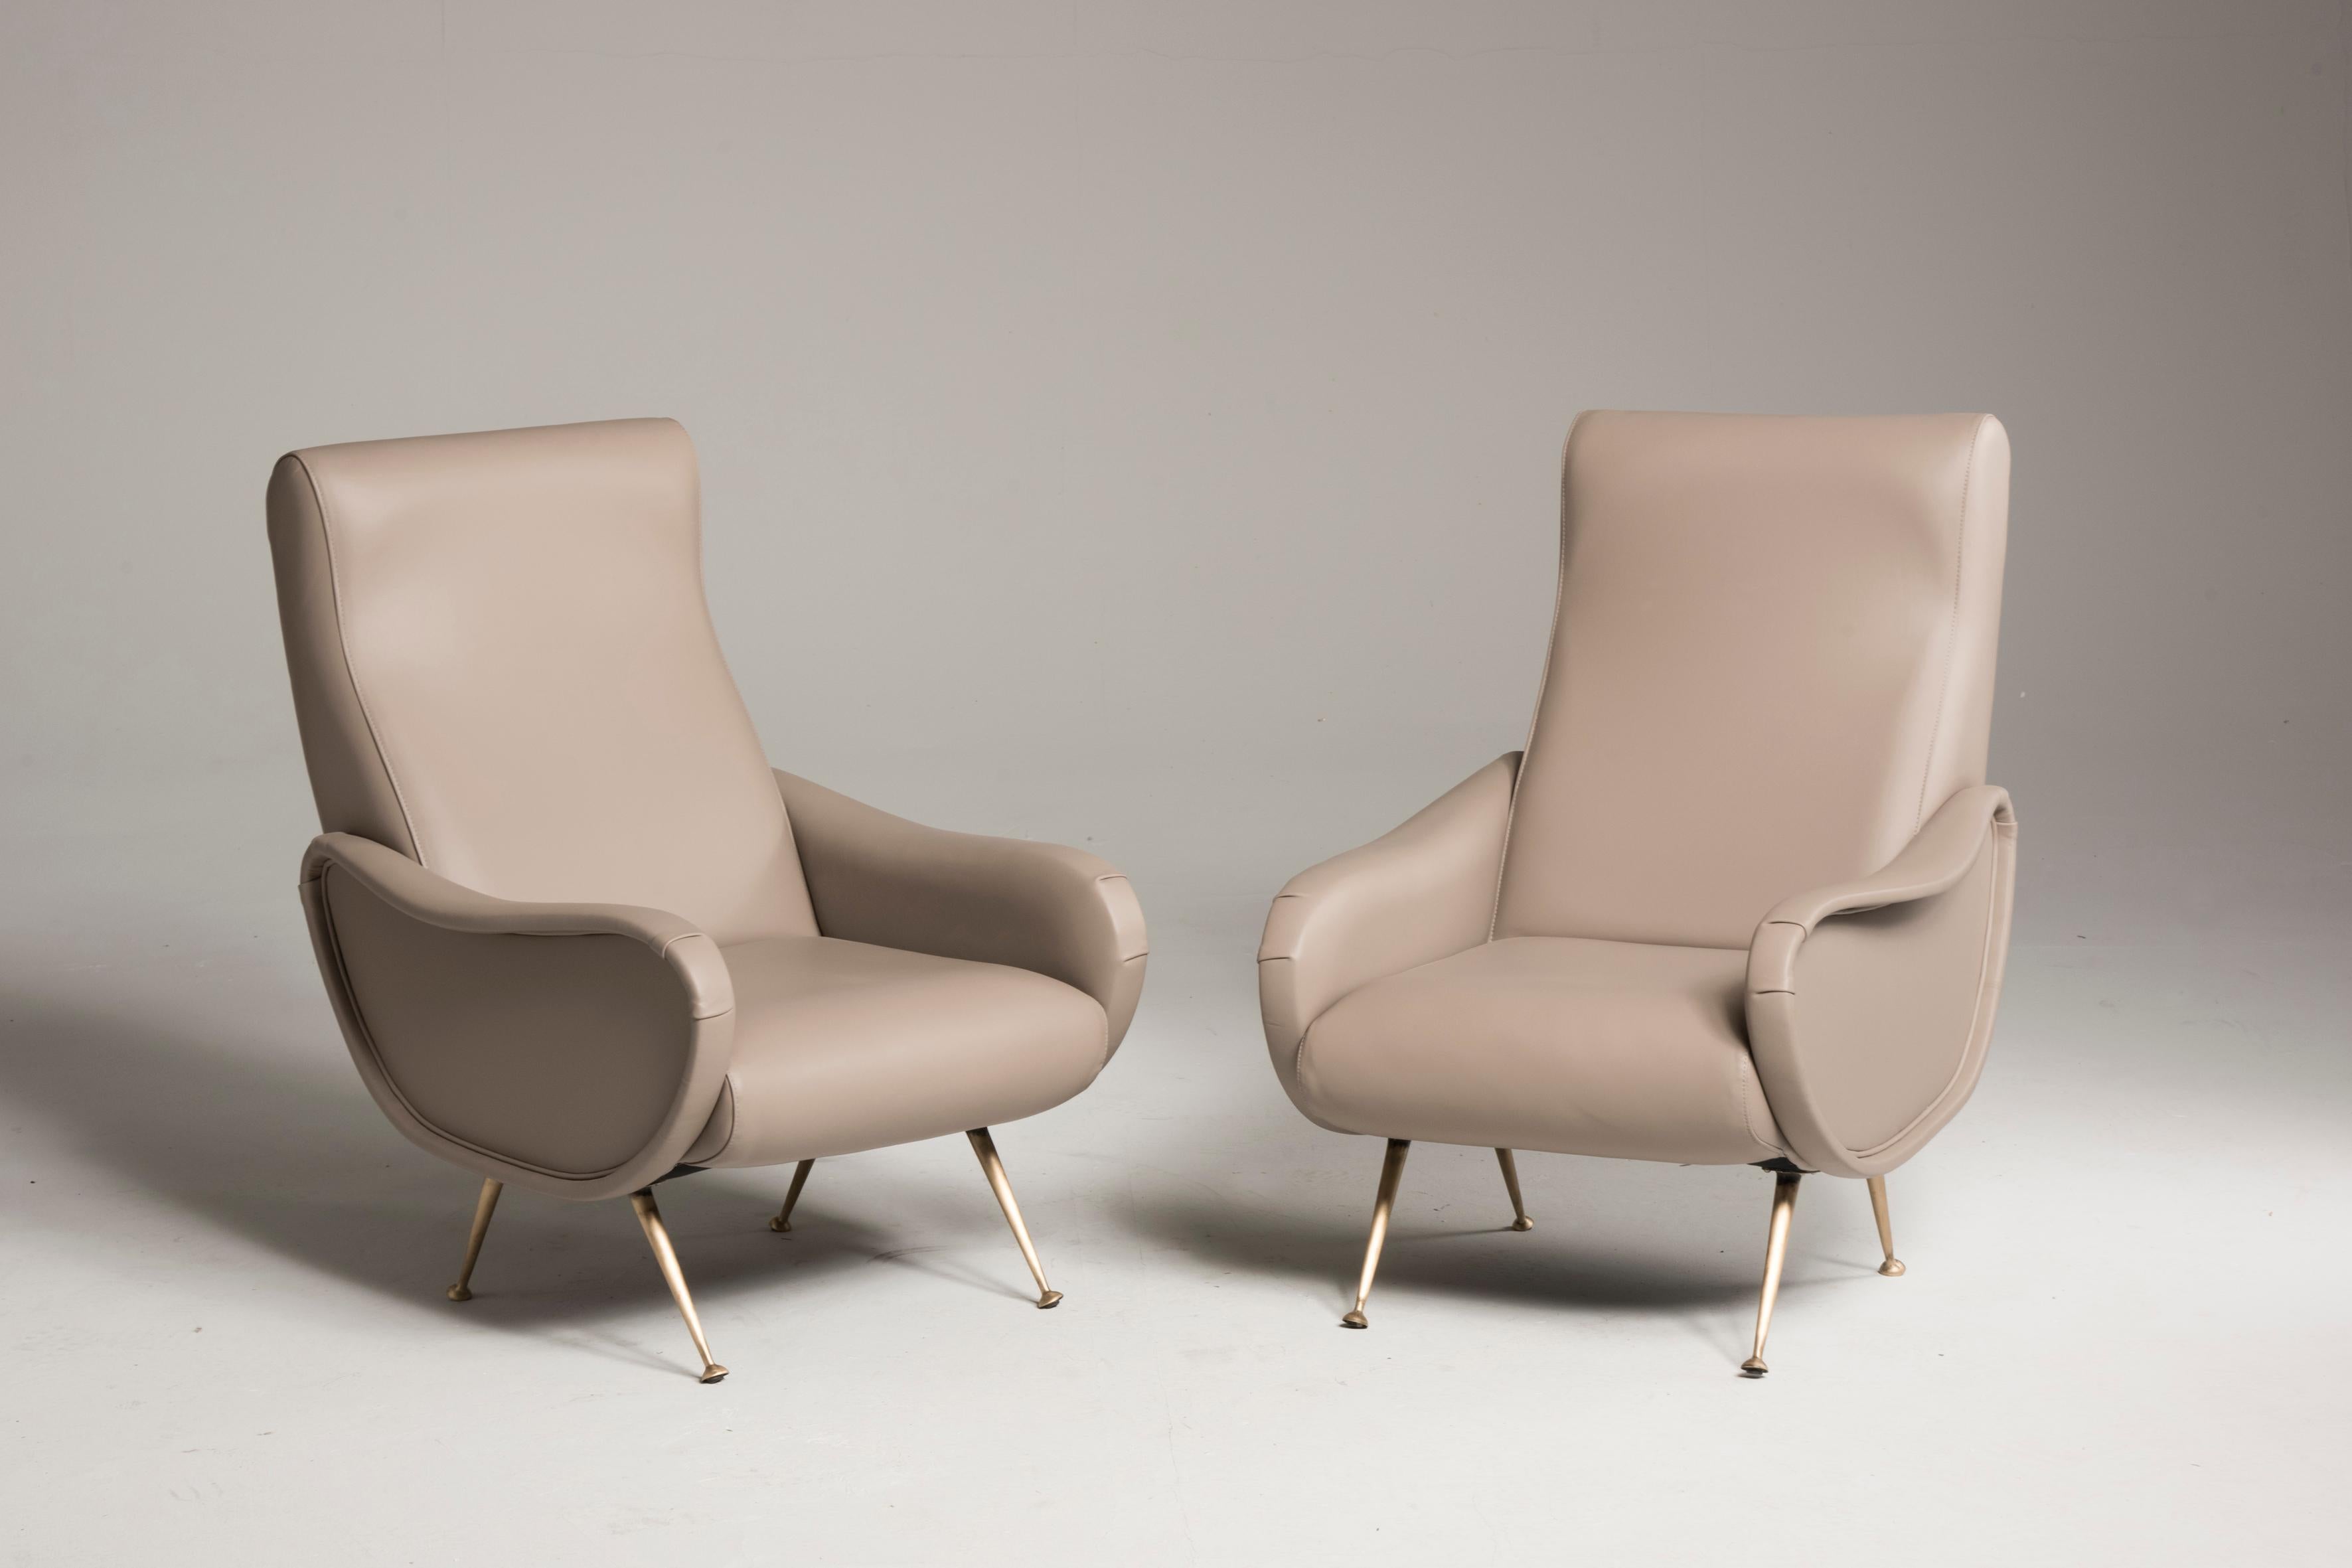 Pair of armchairs in the style of Lady armchairs by Zanuso, from Italy from midcentury period.
Reupholstered in premium quality mauve color leather. New paddings.
Brass legs.
Size: H 94 cm, W 67 cm, D 80 cm
A video is available upon request.
 